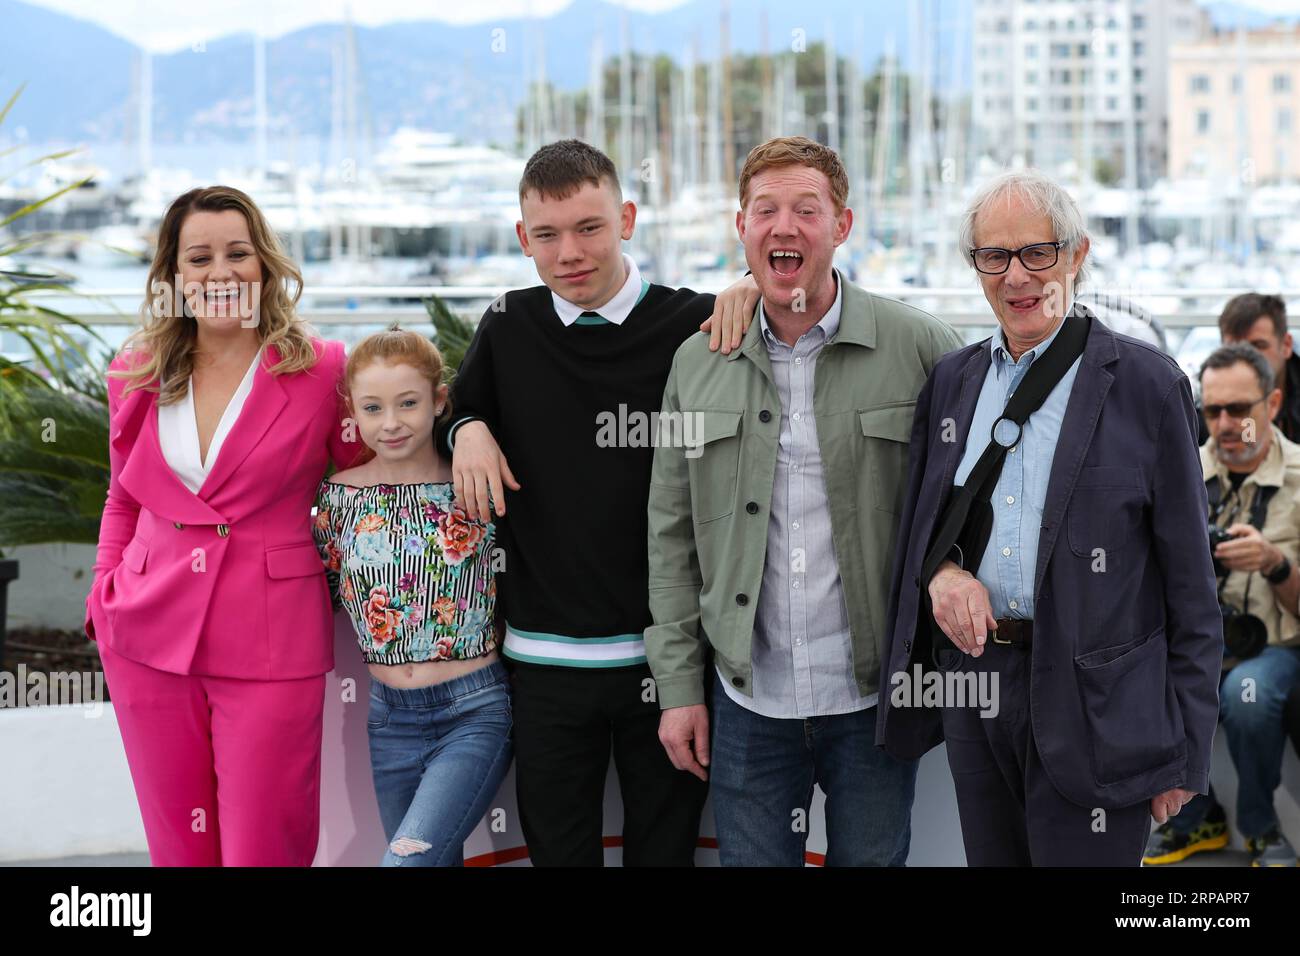 (190517) -- CANNES, May 17, 2019 (Xinhua) -- (L-R) Debbie Honeywood, Katie Proctor, Rhys Stone, Kris Hitchen and director Ken Loach pose during a photocall for the film Sorry We Missed You at the 72nd Cannes Film Festival in Cannes, France, May 17, 2019. British director Ken Loach s film Sorry We Missed You will compete for the Palme d Or with other 20 feature films during the 72nd Cannes Film Festival which is held from May 14 to 25. (Xinhua/Zhang Cheng) FRANCE-CANNES-72ND FILM FESTIVAL-SORRY WE MISSED YOU PUBLICATIONxNOTxINxCHN Stock Photo